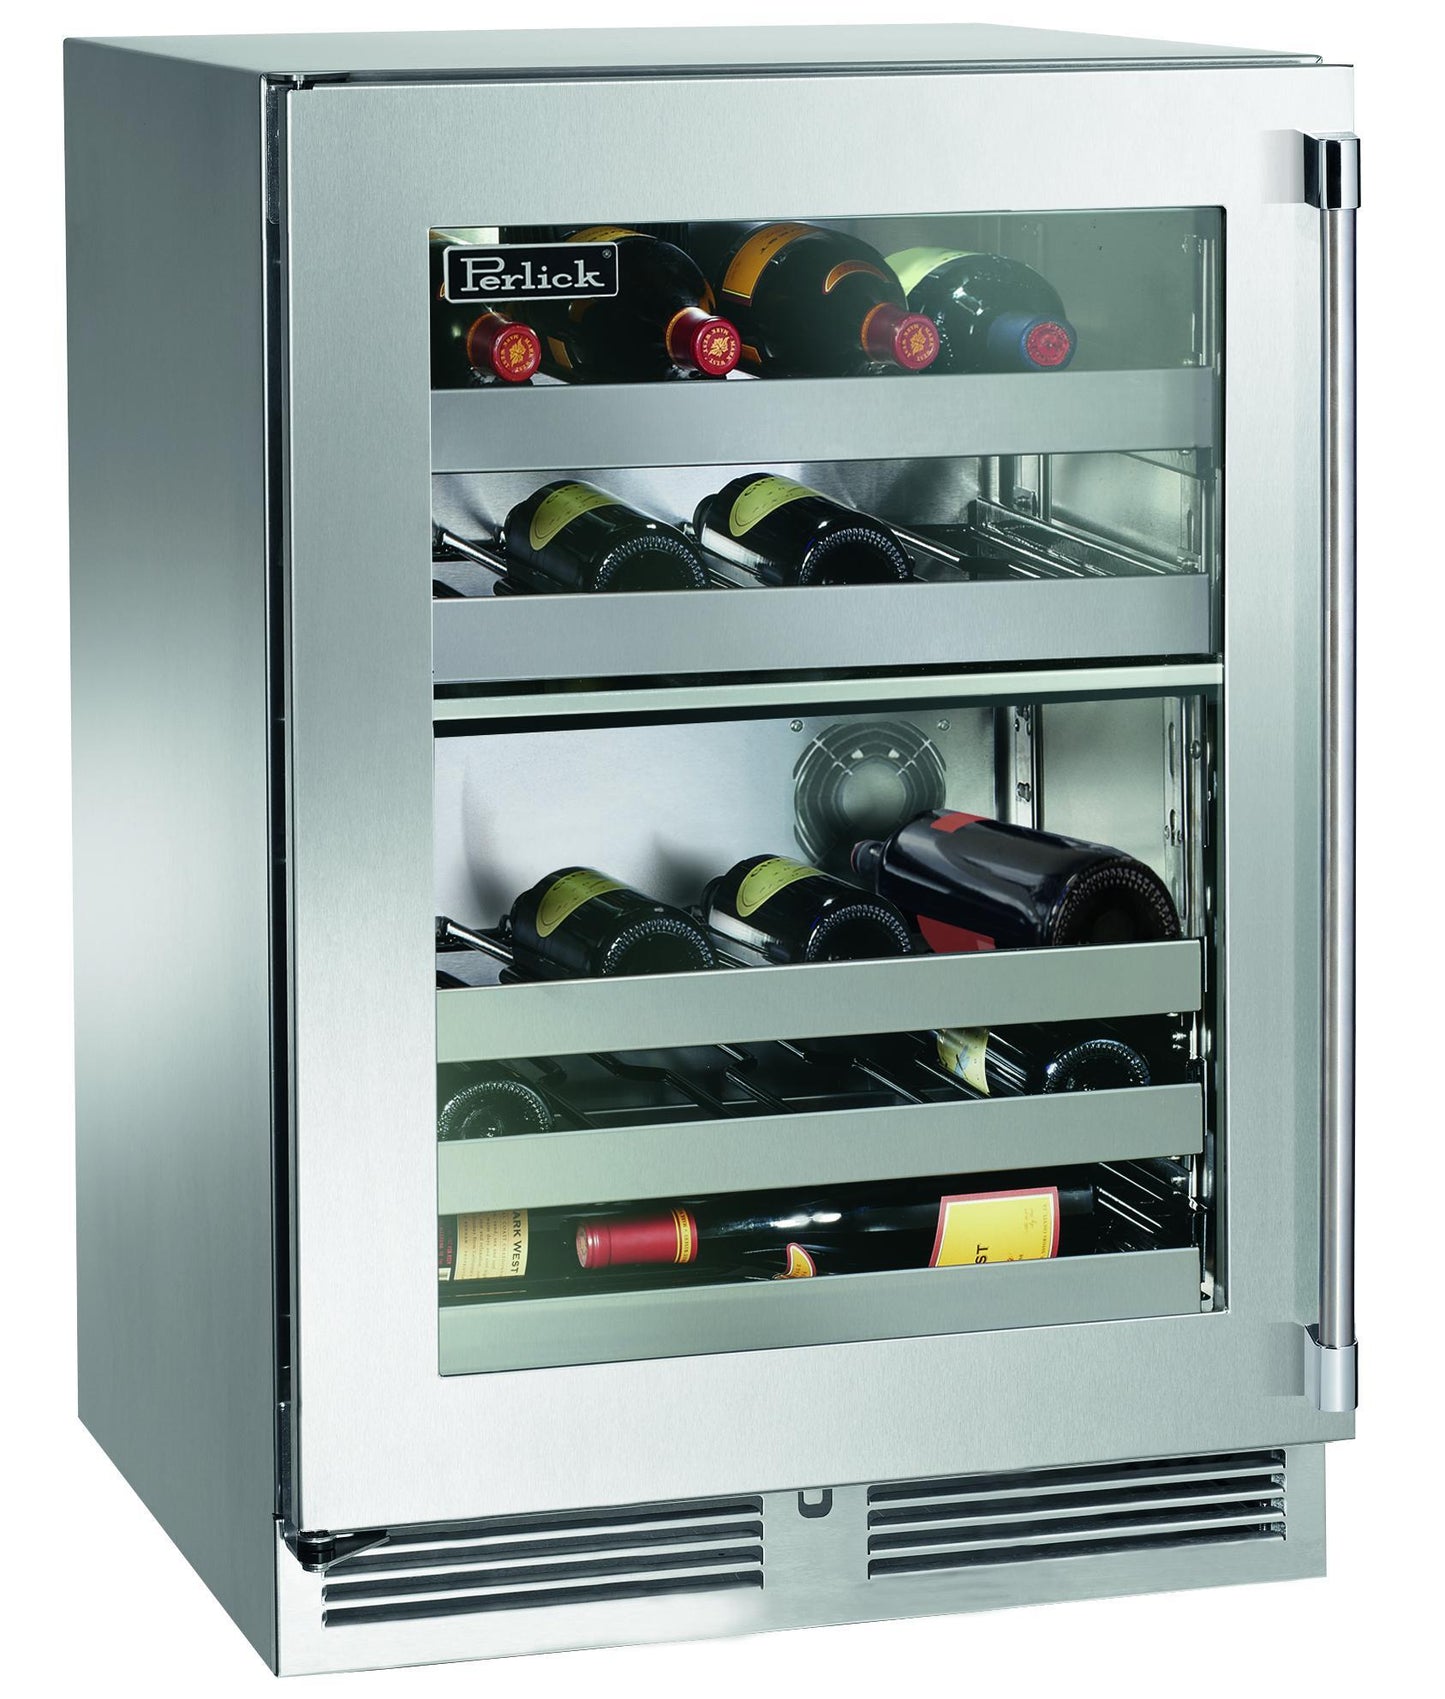 Perlick HP24DO43R 24"Outdoor Dual-Zone Wine Reserve